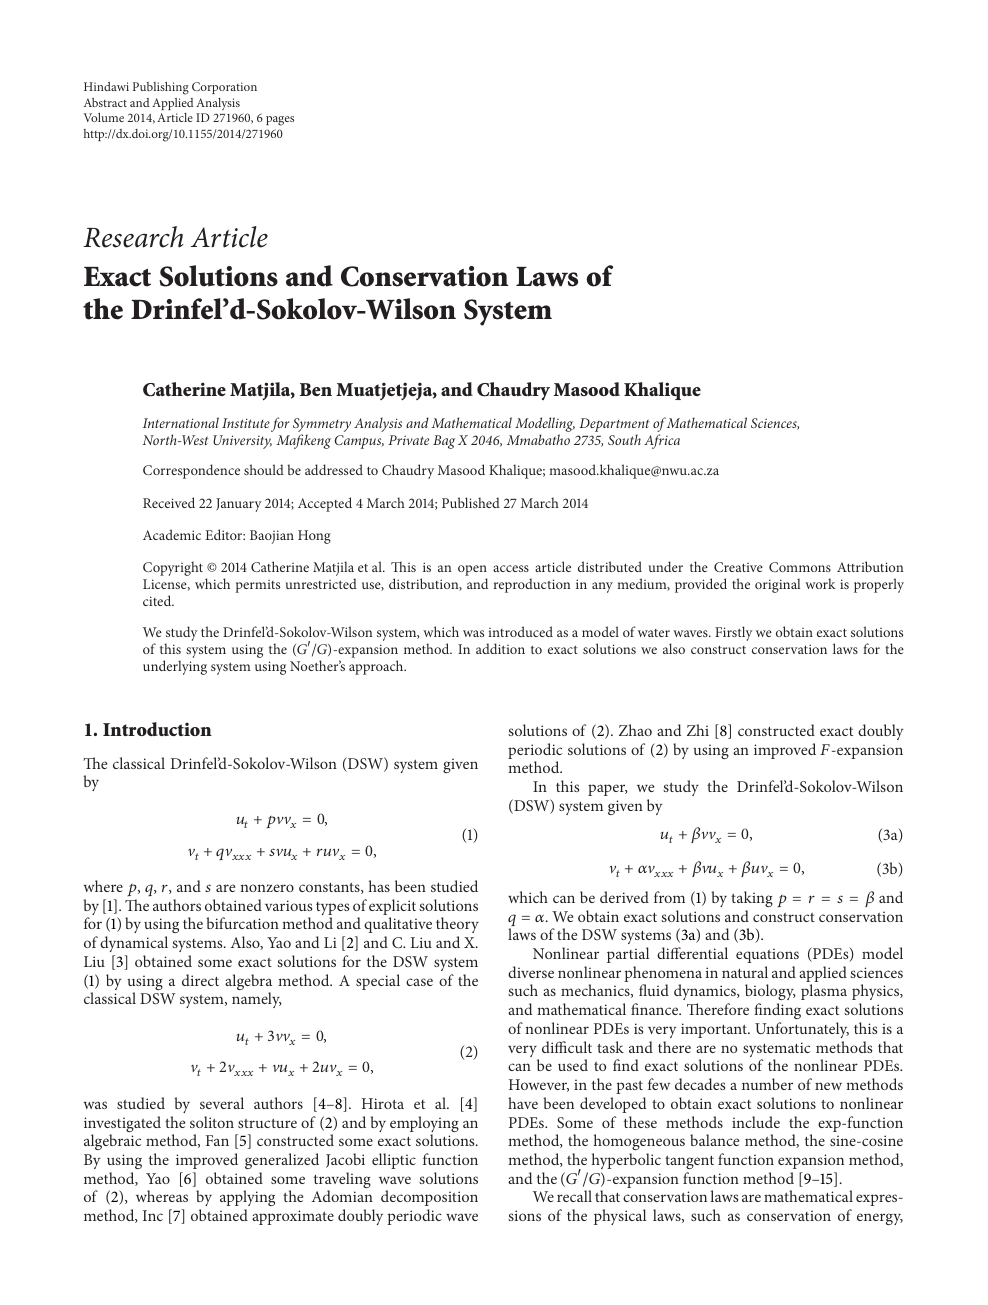 Exact Solutions And Conservation Laws Of The Drinfel D Sokolov Wilson System Topic Of Research Paper In Mathematics Download Scholarly Article Pdf And Read For Free On Cyberleninka Open Science Hub